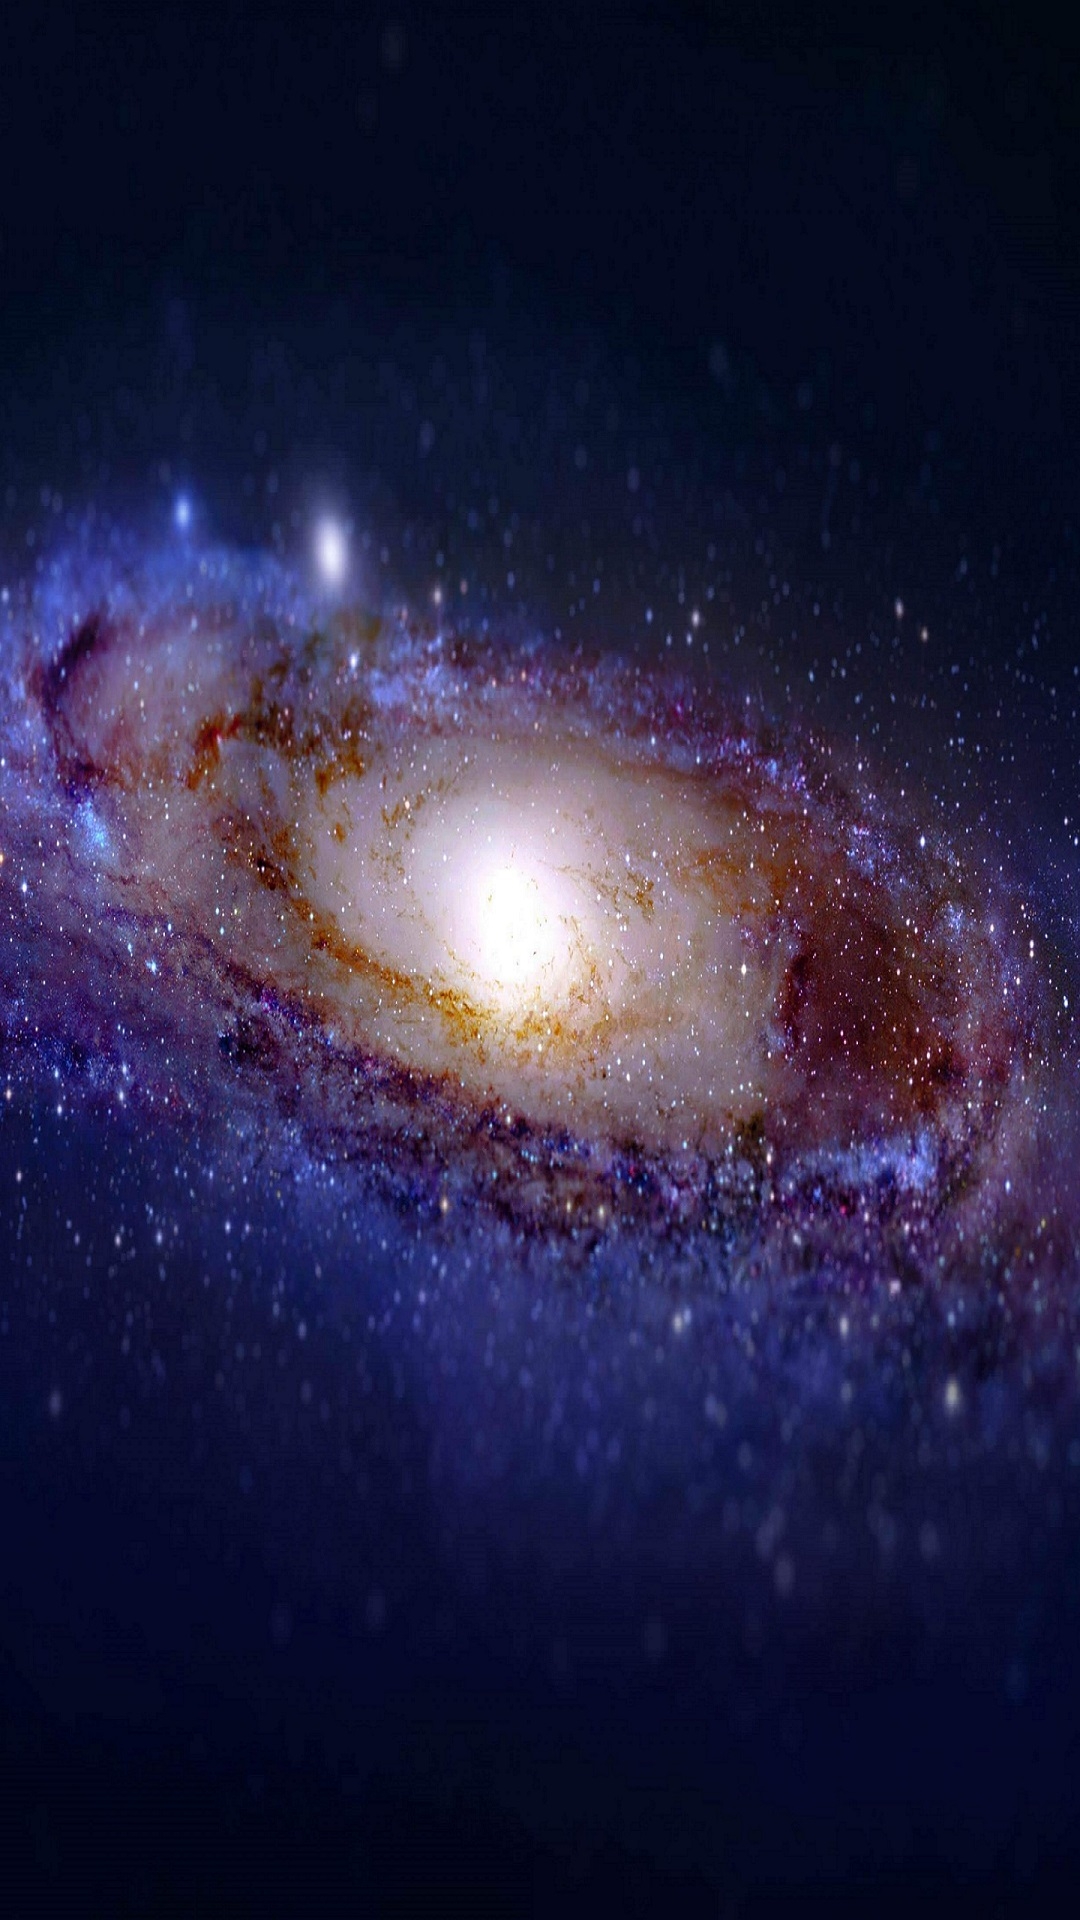 Andromeda Galaxy for Apple iPhone 6S & 7 Plus resolution